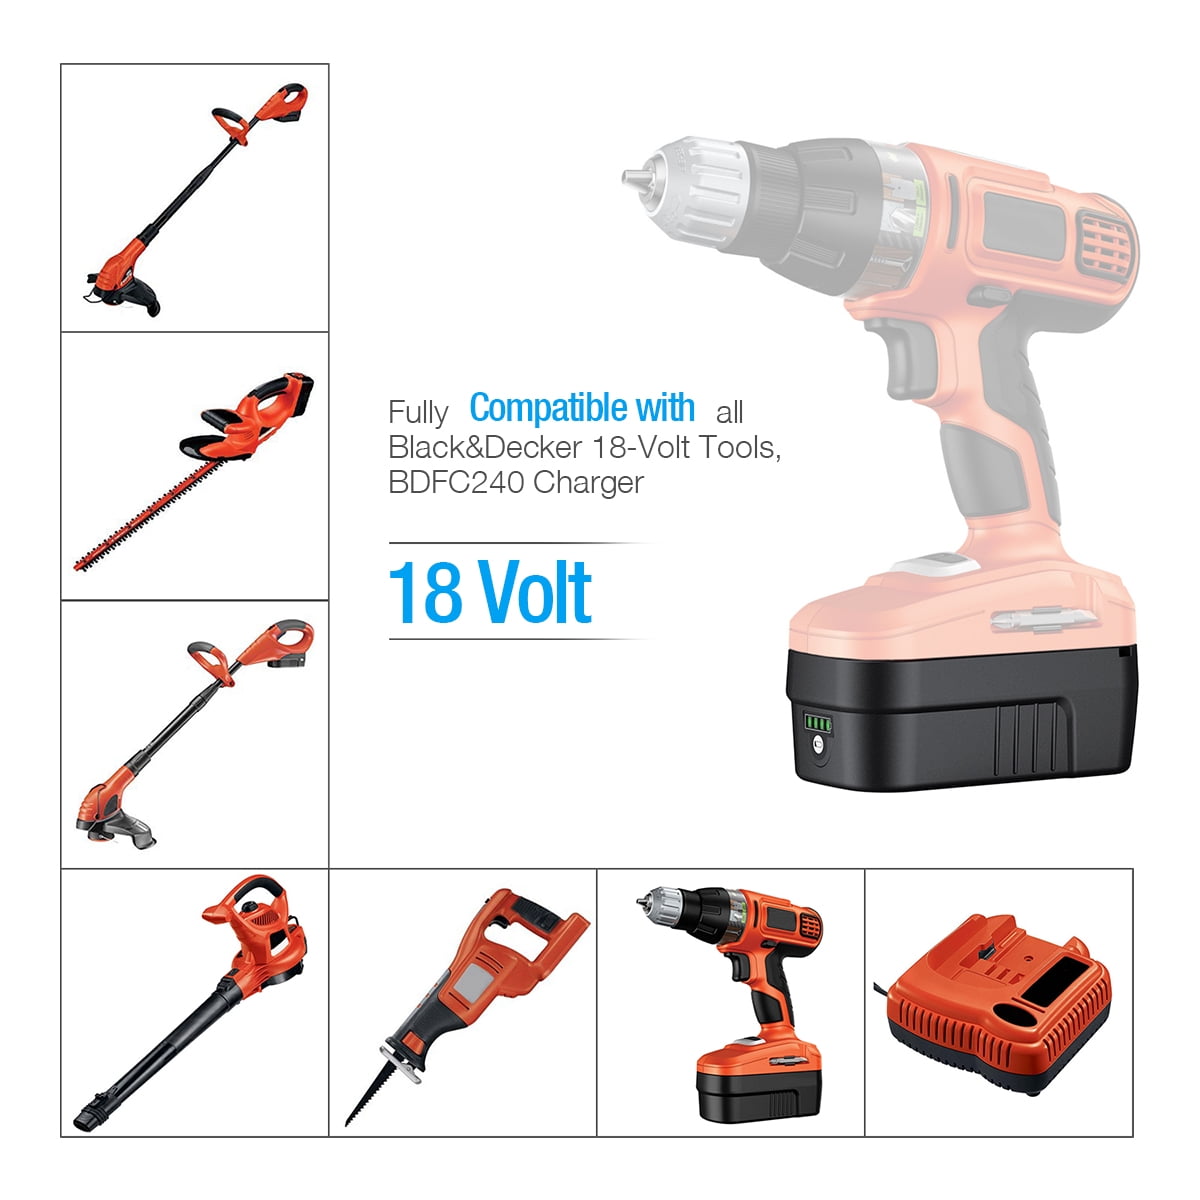 Upgraded 3.8Ah Replace for Black and Decker 20V Lithium Battery MAX LBXR20  Battery LB20 LBX20 LBX4020 LB2X4020 LBXR2020-OPE Cordless Power Tools 2